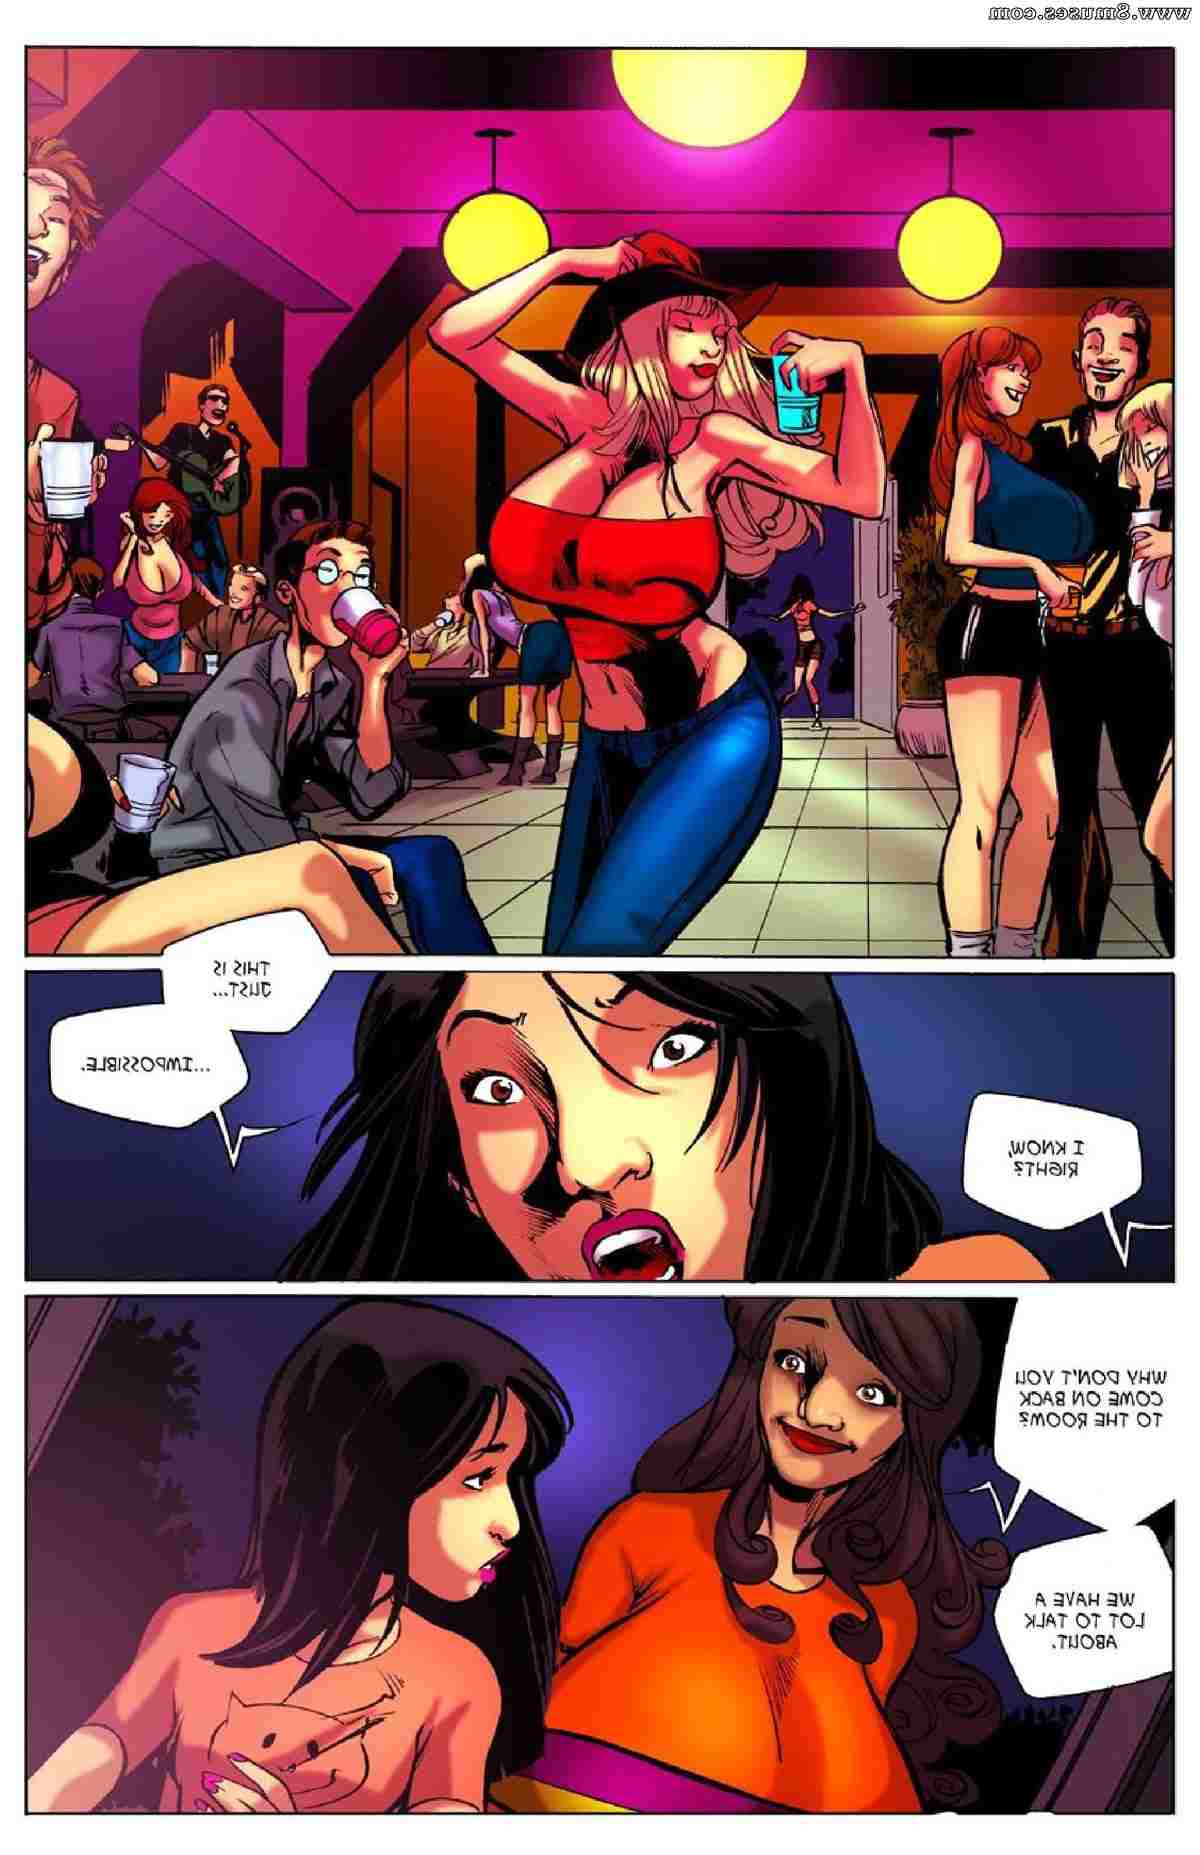 BE-Story-Club-Comics/Welcome-to-Chastity Welcome_to_Chastity__8muses_-_Sex_and_Porn_Comics_12.jpg